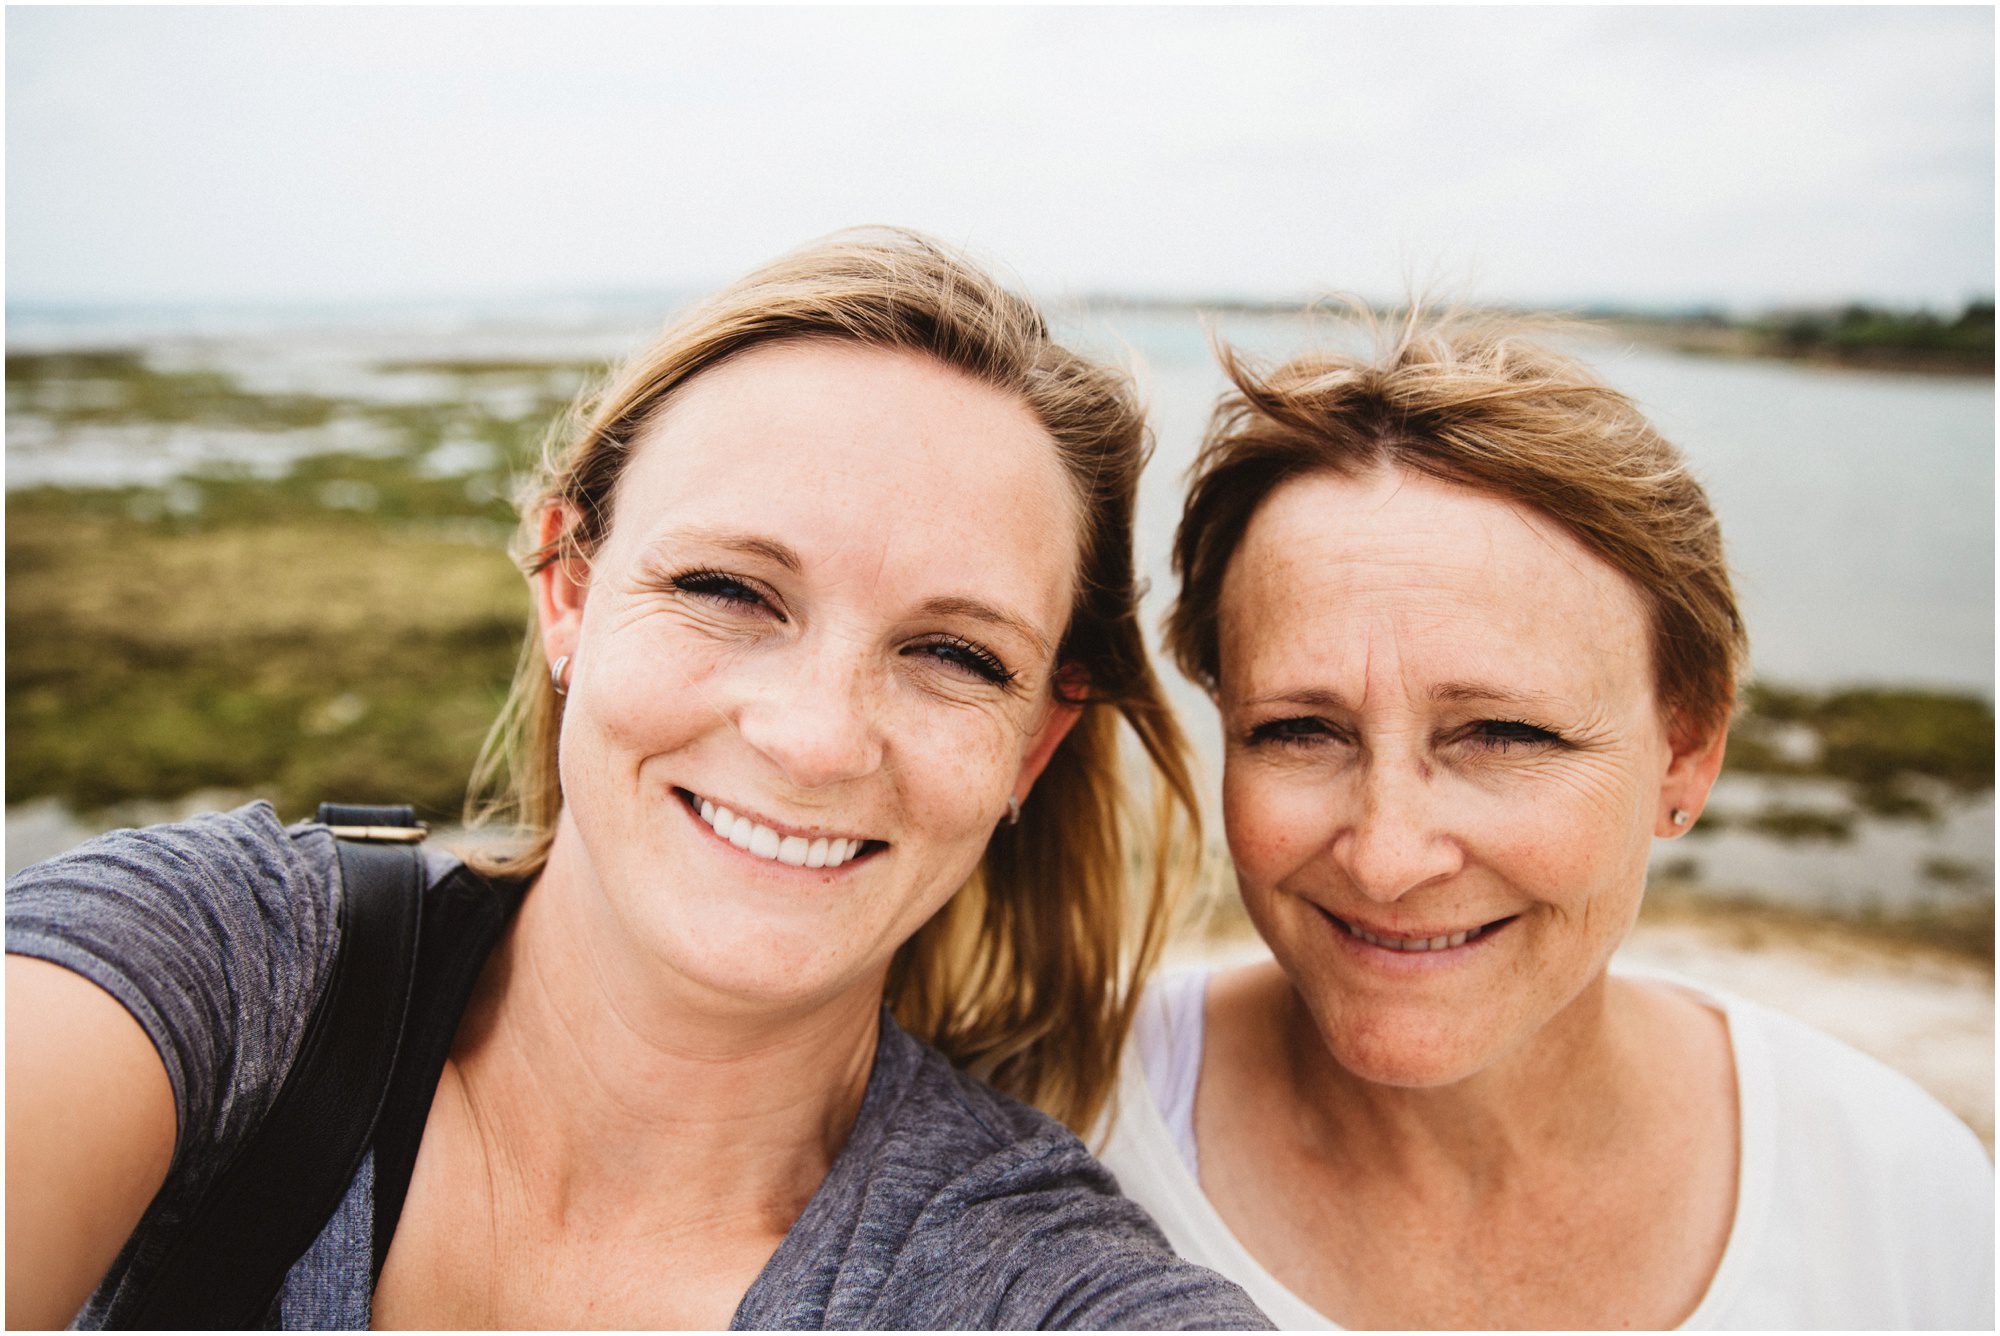 Adventures in Okinawa with my Mom selfie on the beach